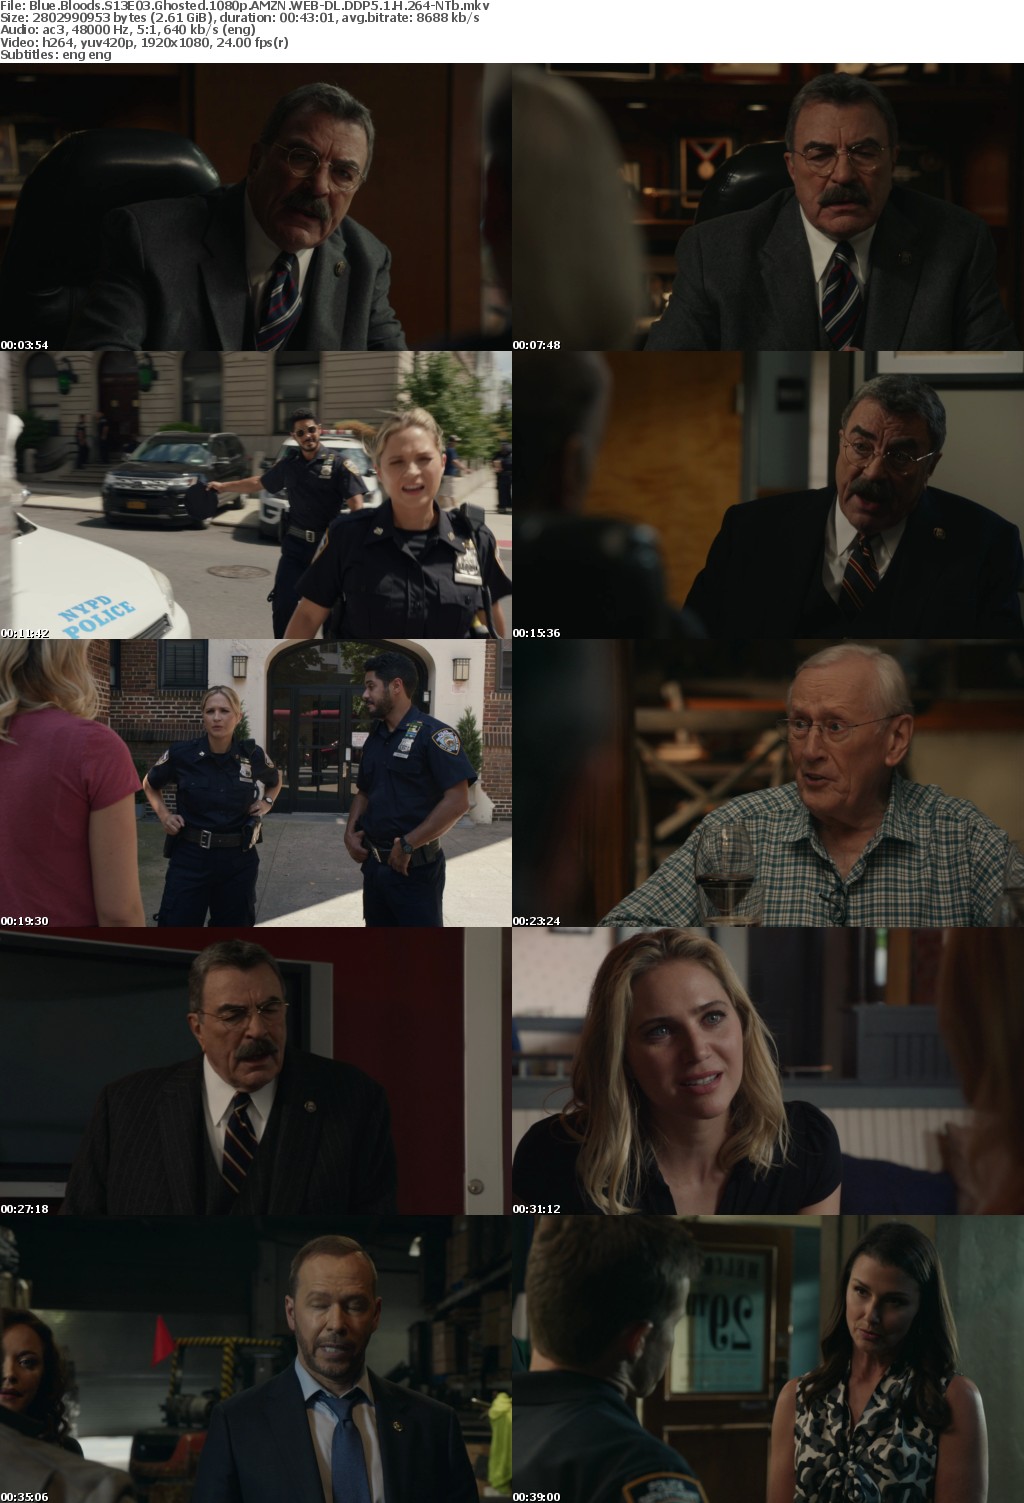 Blue Bloods S13E03 Ghosted 1080p AMZN WEBRip DDP5 1 x264-NTb